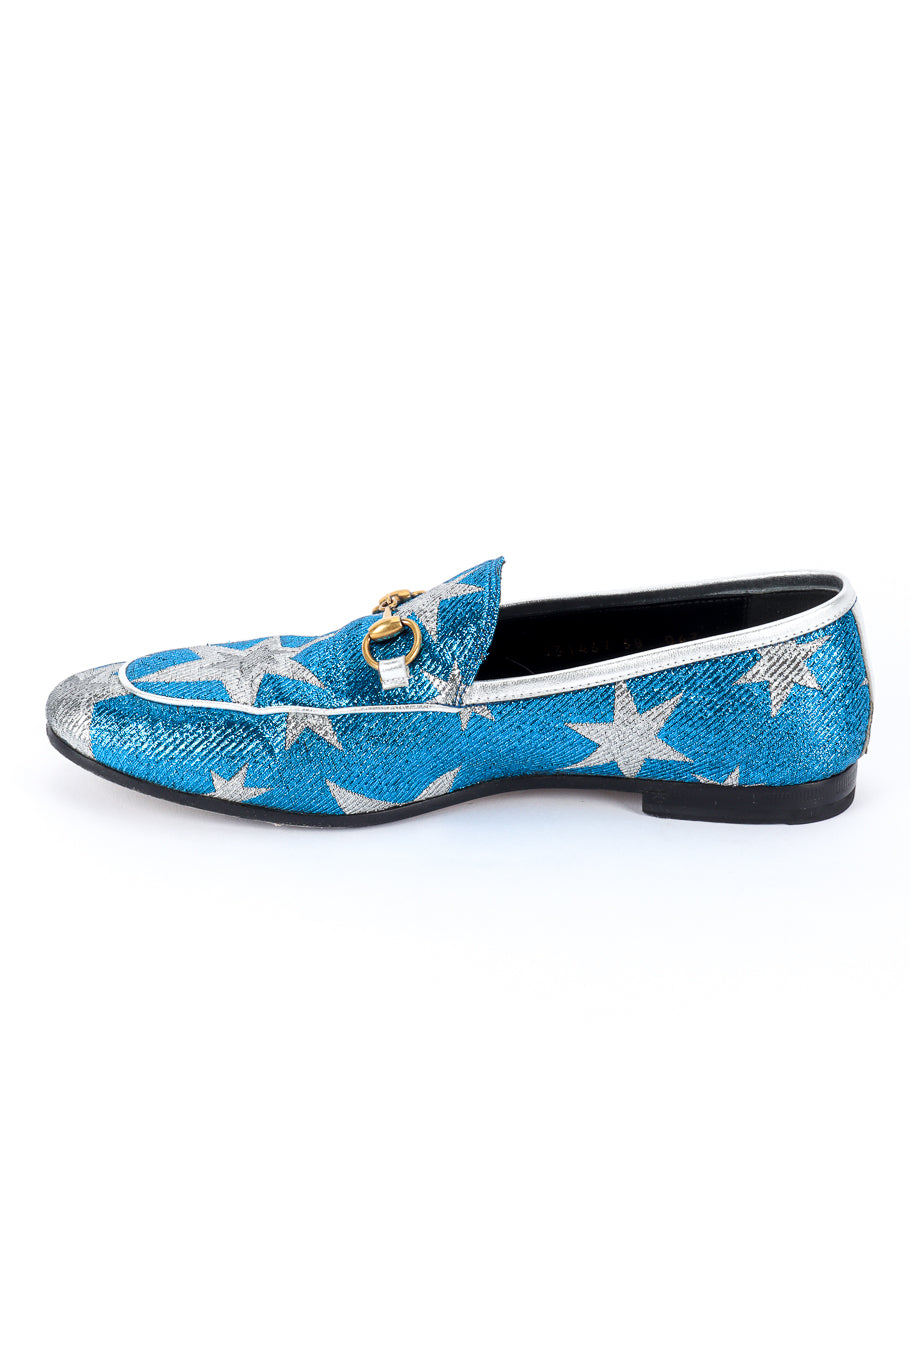 Gucci Starry Sky Lurex Loafers right shoe inner side @recess la